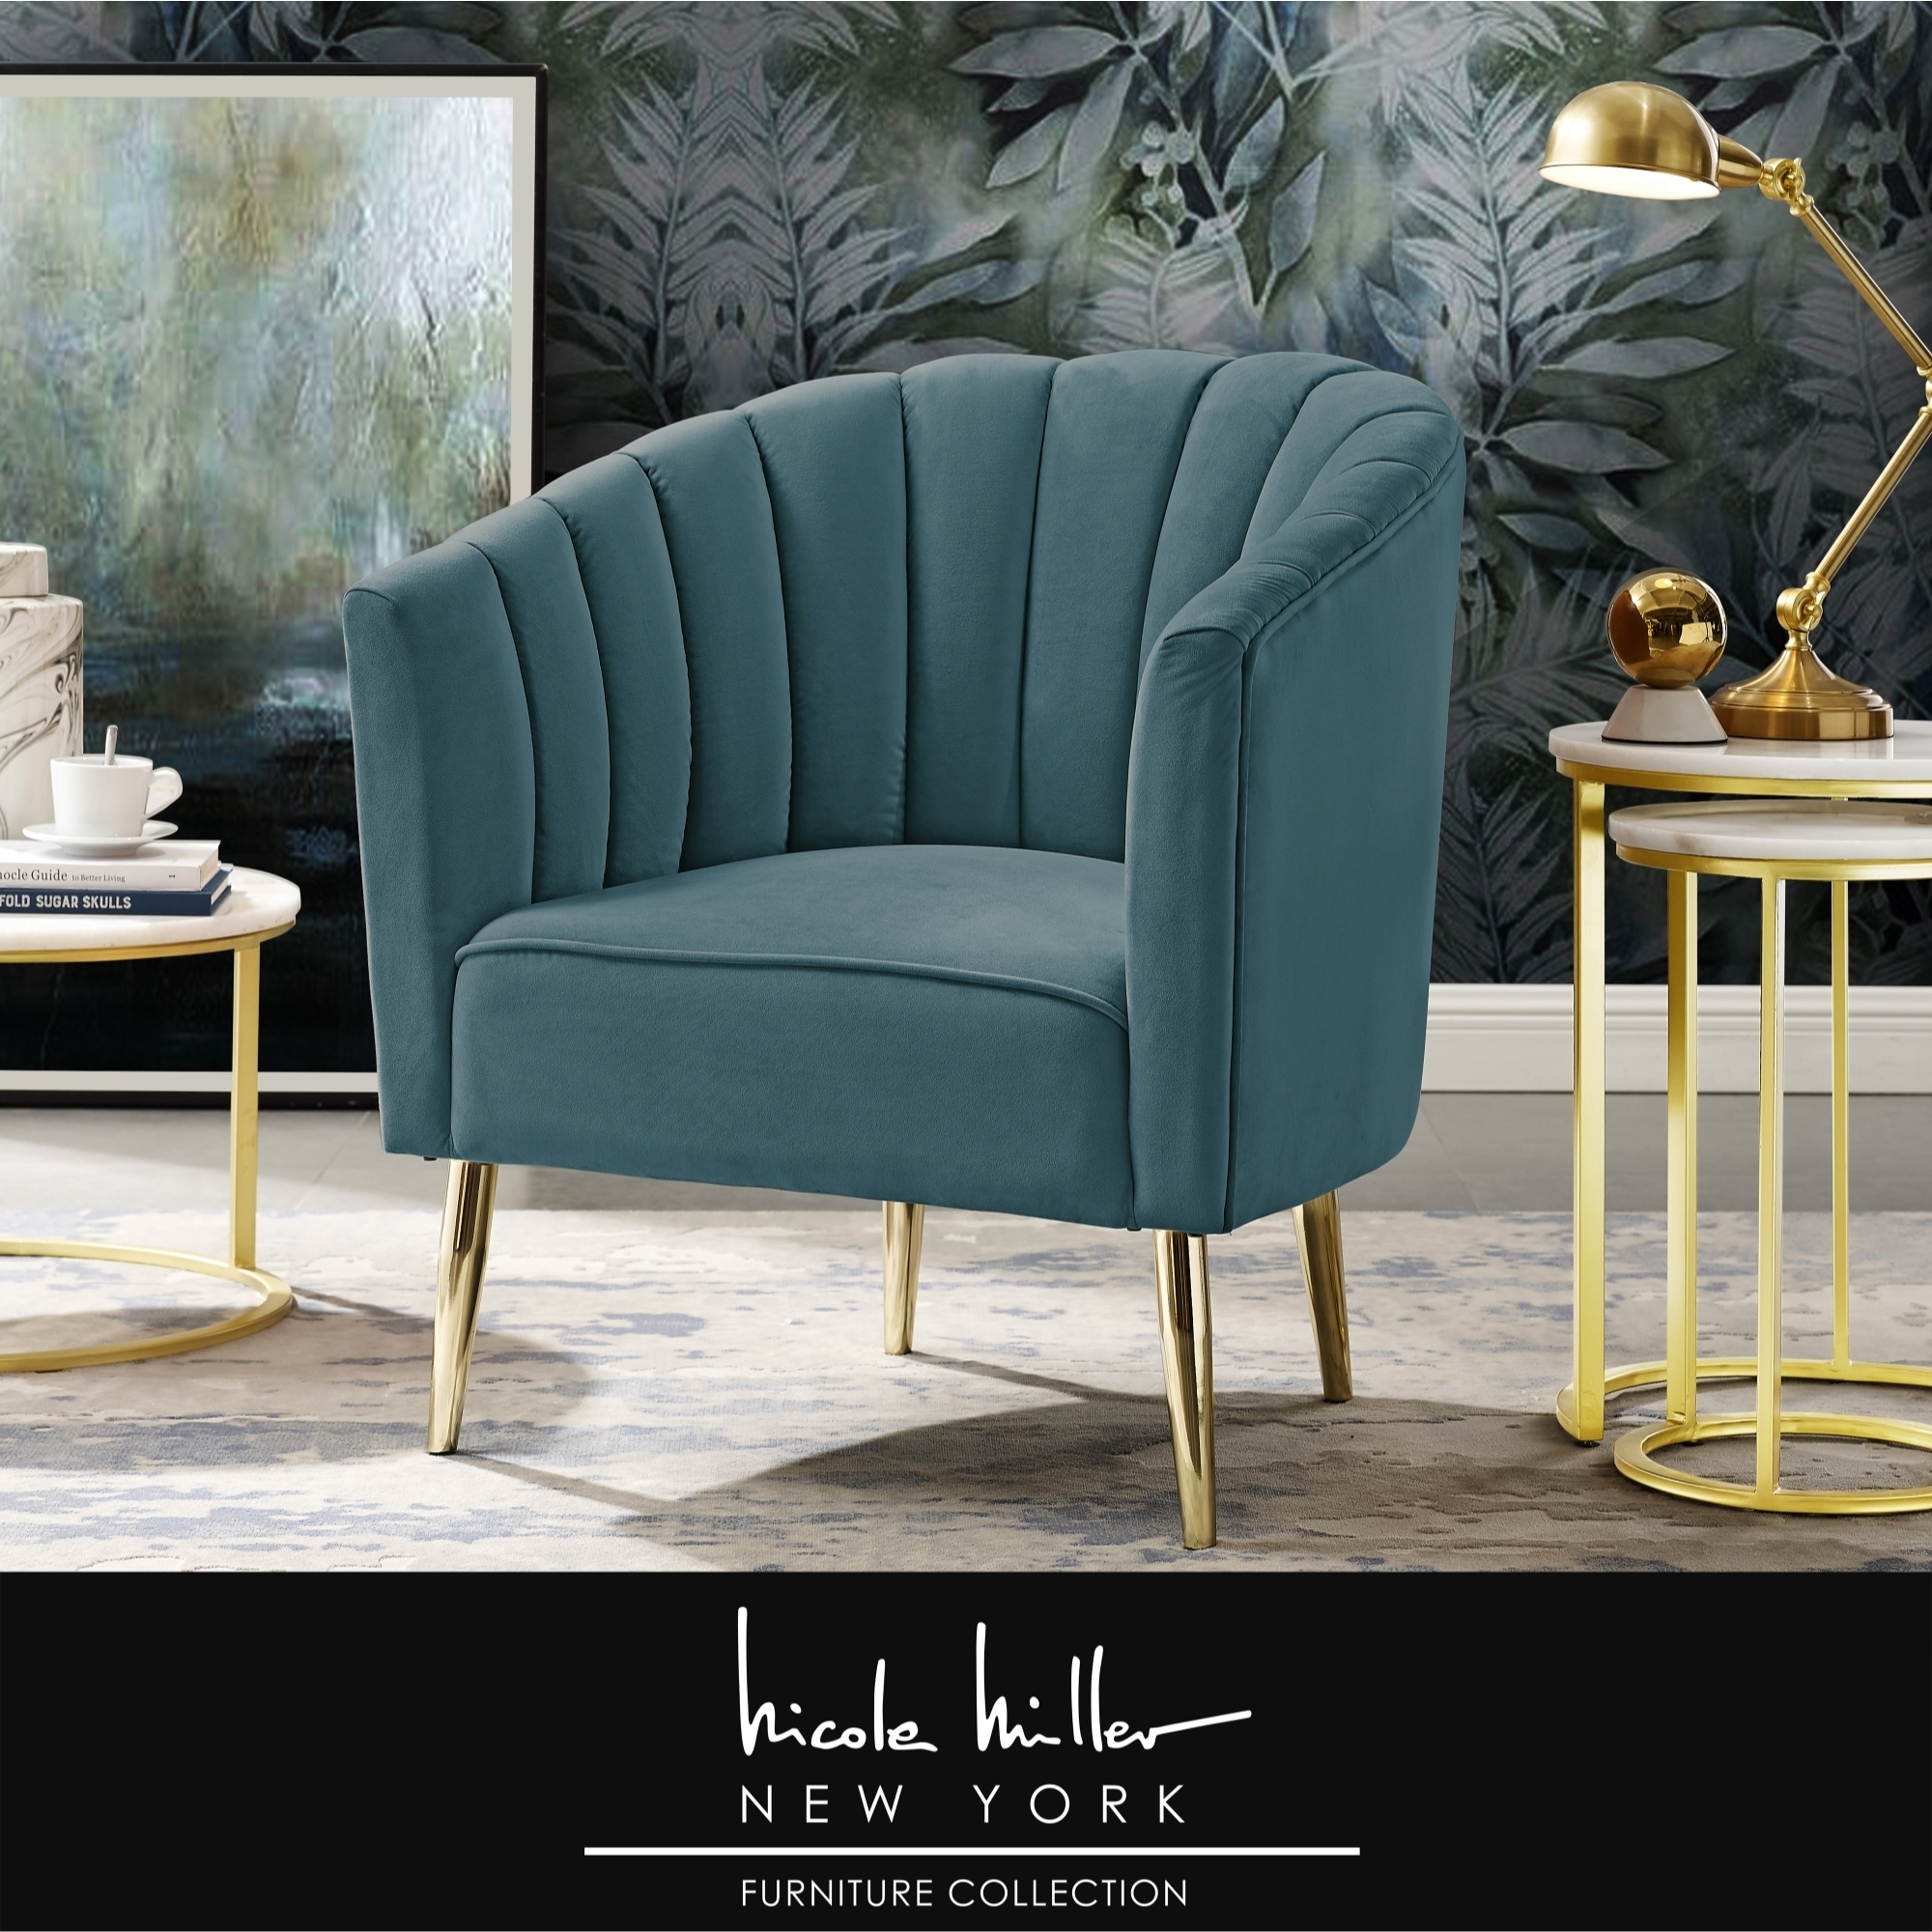 Nicole Miller Kody Velvet Accent Chair-Channel Tufted Back-Mirror Lacquer Finish Legs - Teal/Gold